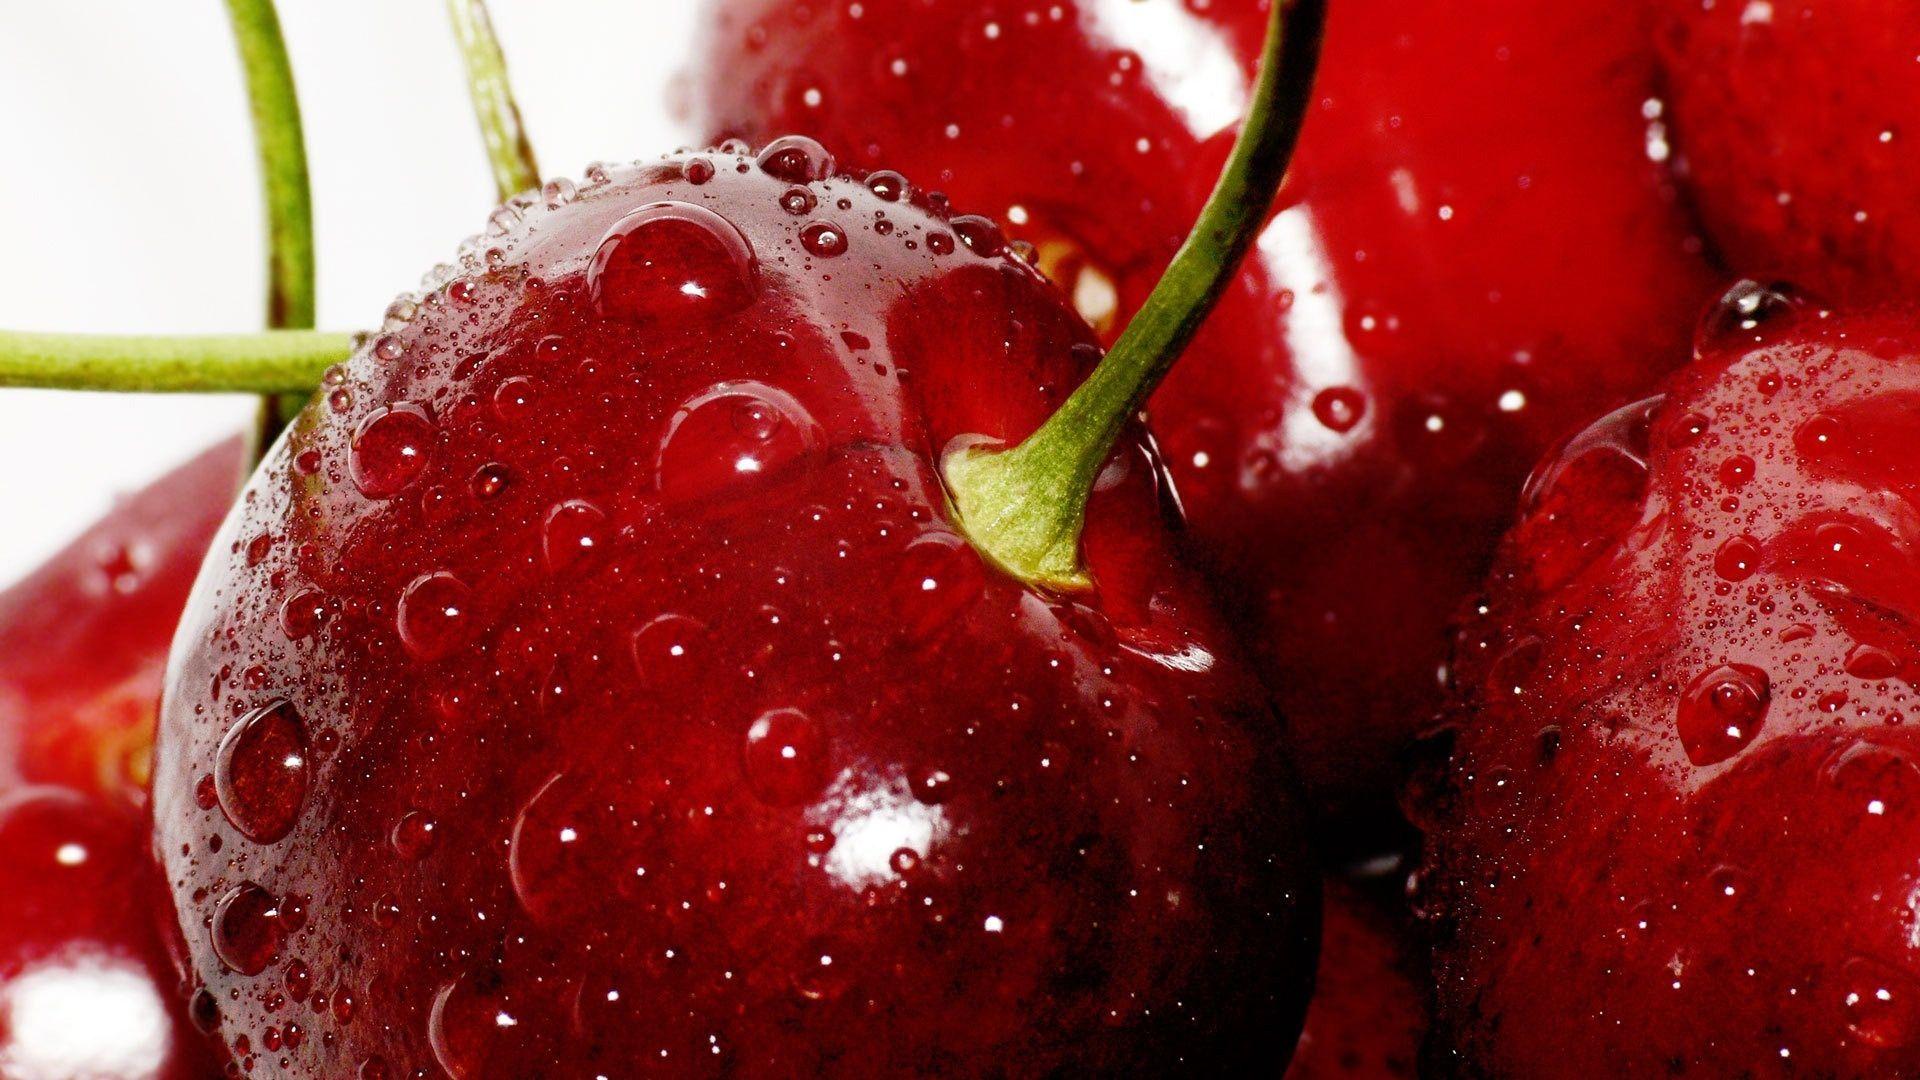 Fruits Wallpaper, HQ Definition Fruits Wallpaper Archives 46